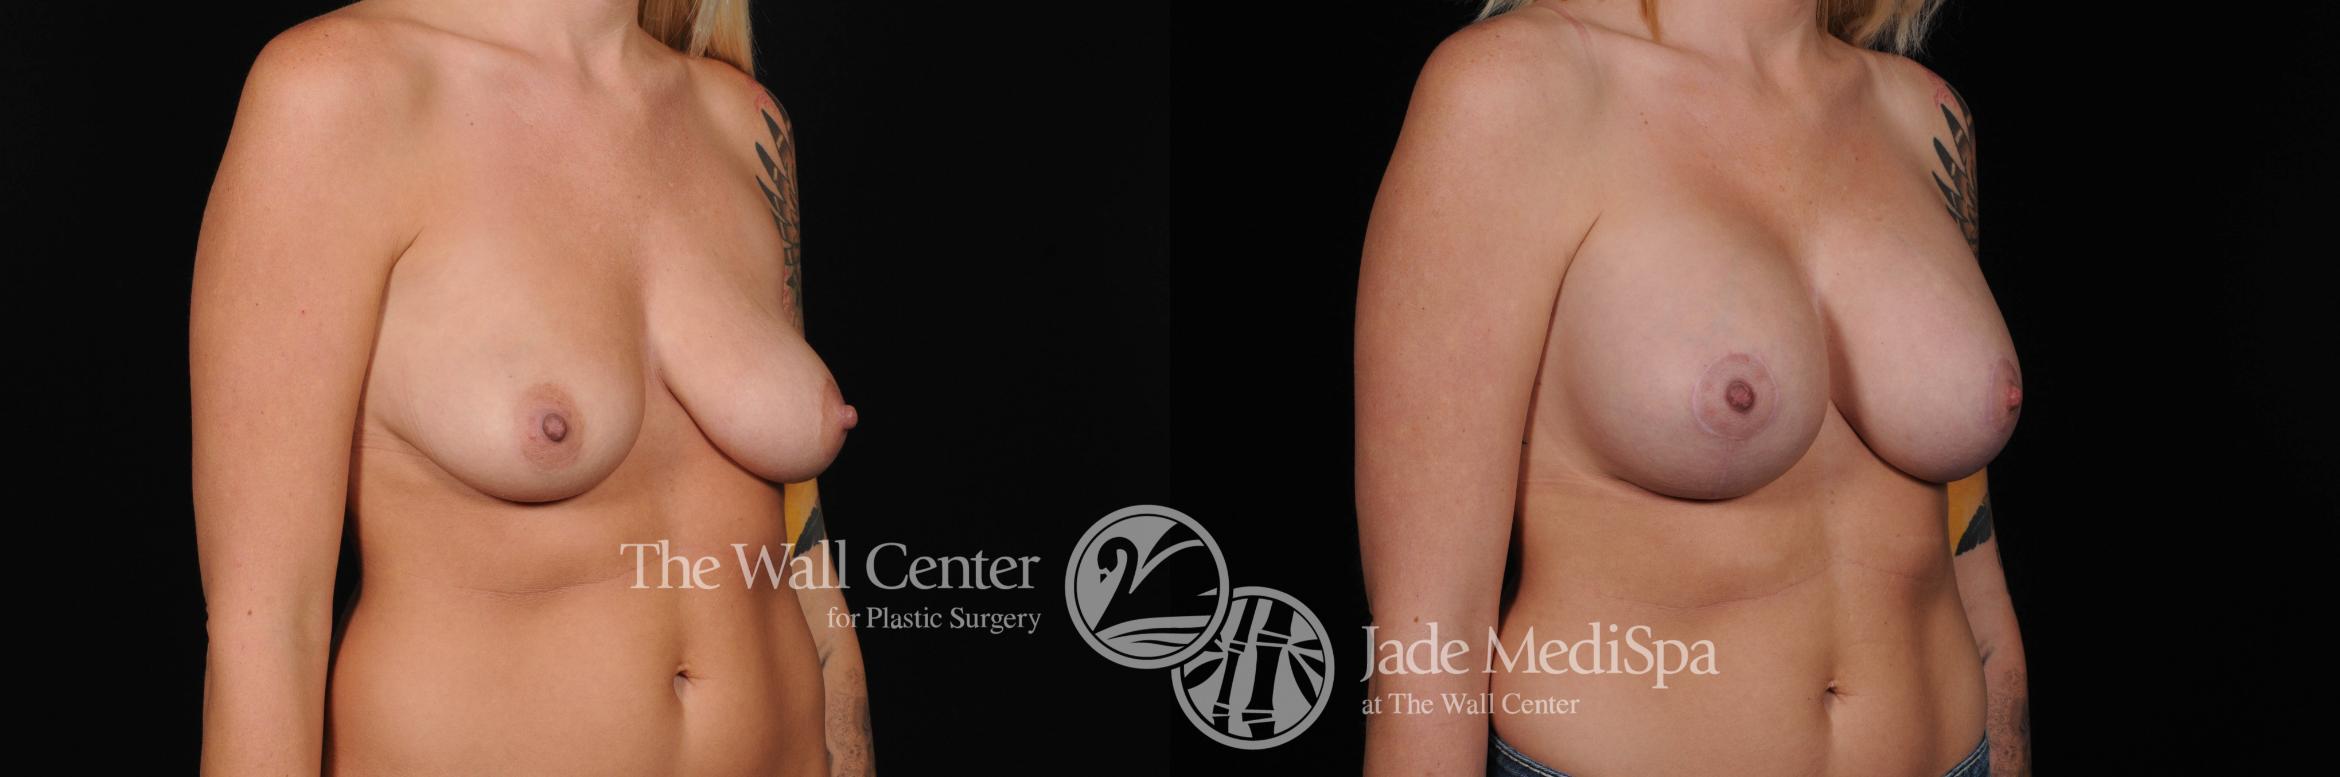 Breast Aug with Lift Right Oblique Photo, Shreveport, Louisiana, The Wall Center for Plastic Surgery, Case 808